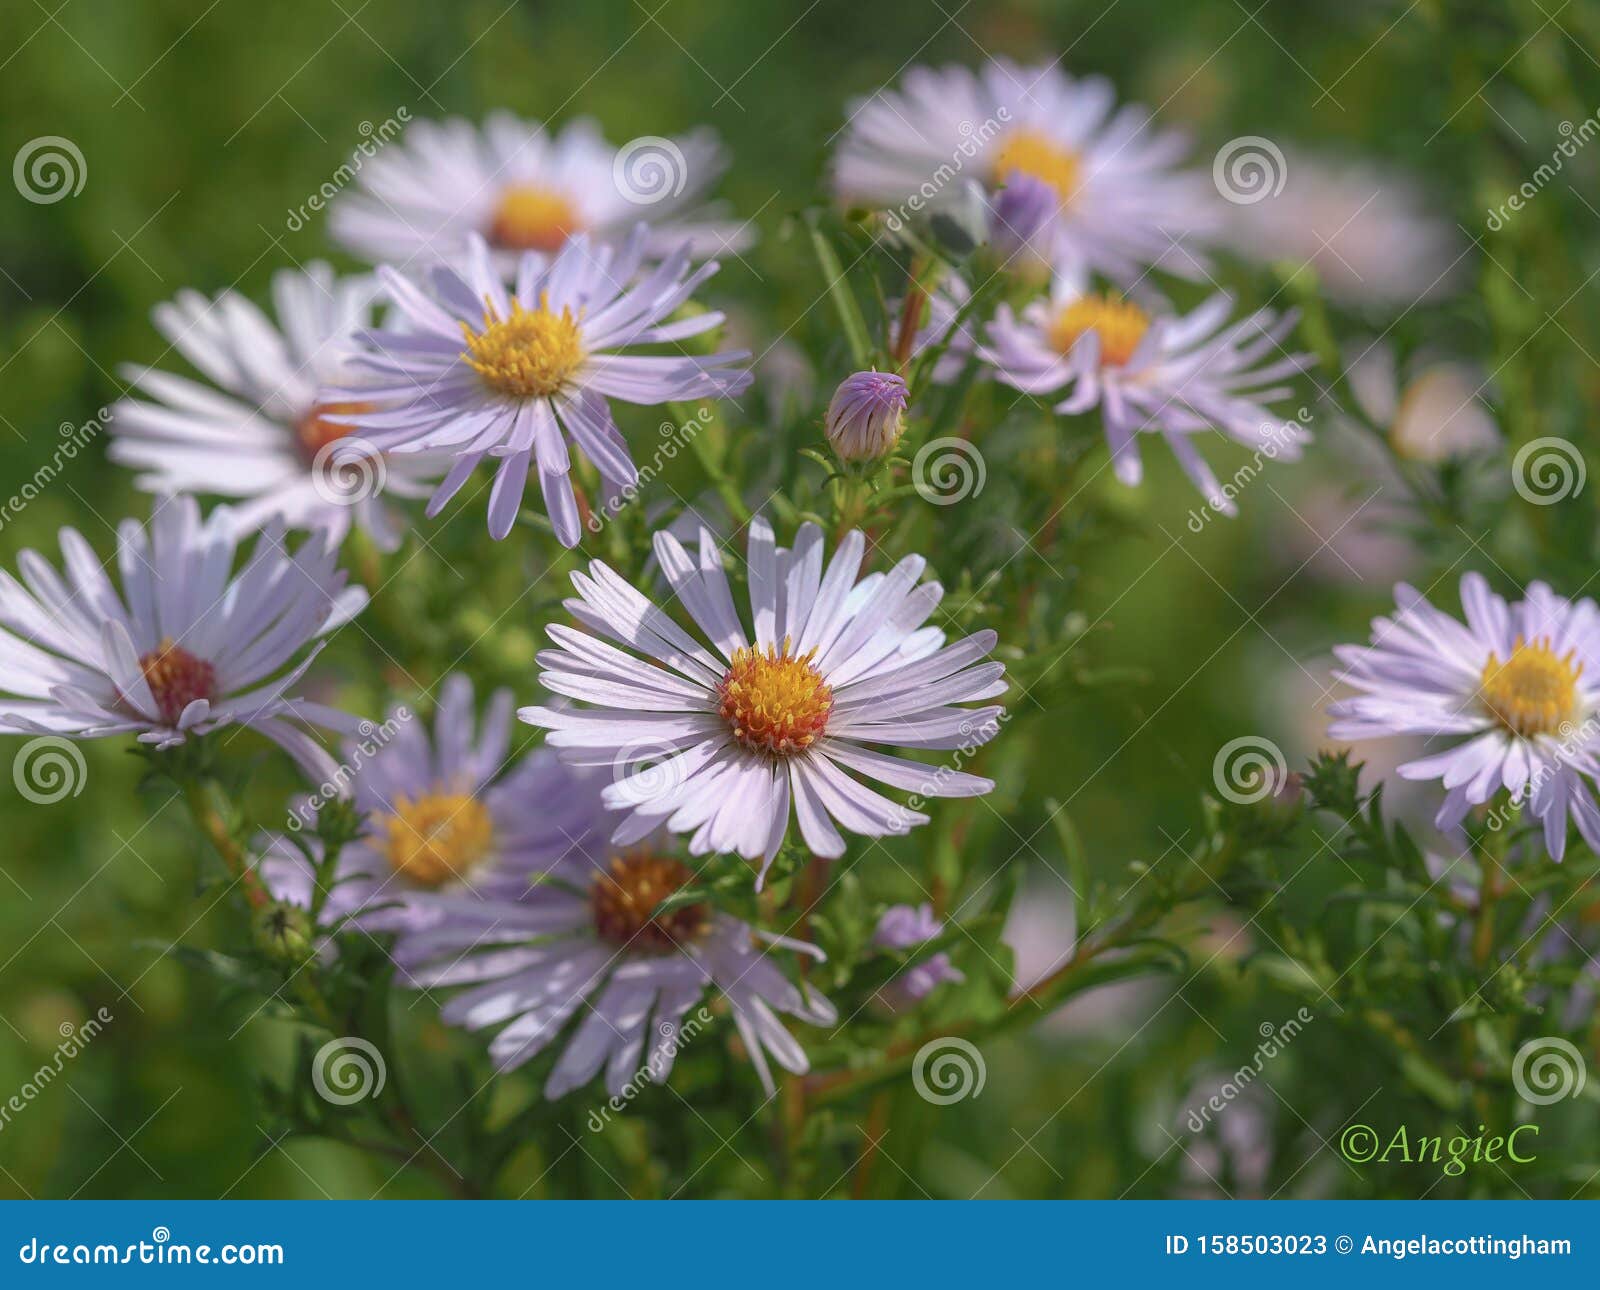 1 024 Wild Asters Photos Free Royalty Free Stock Photos From Dreamstime